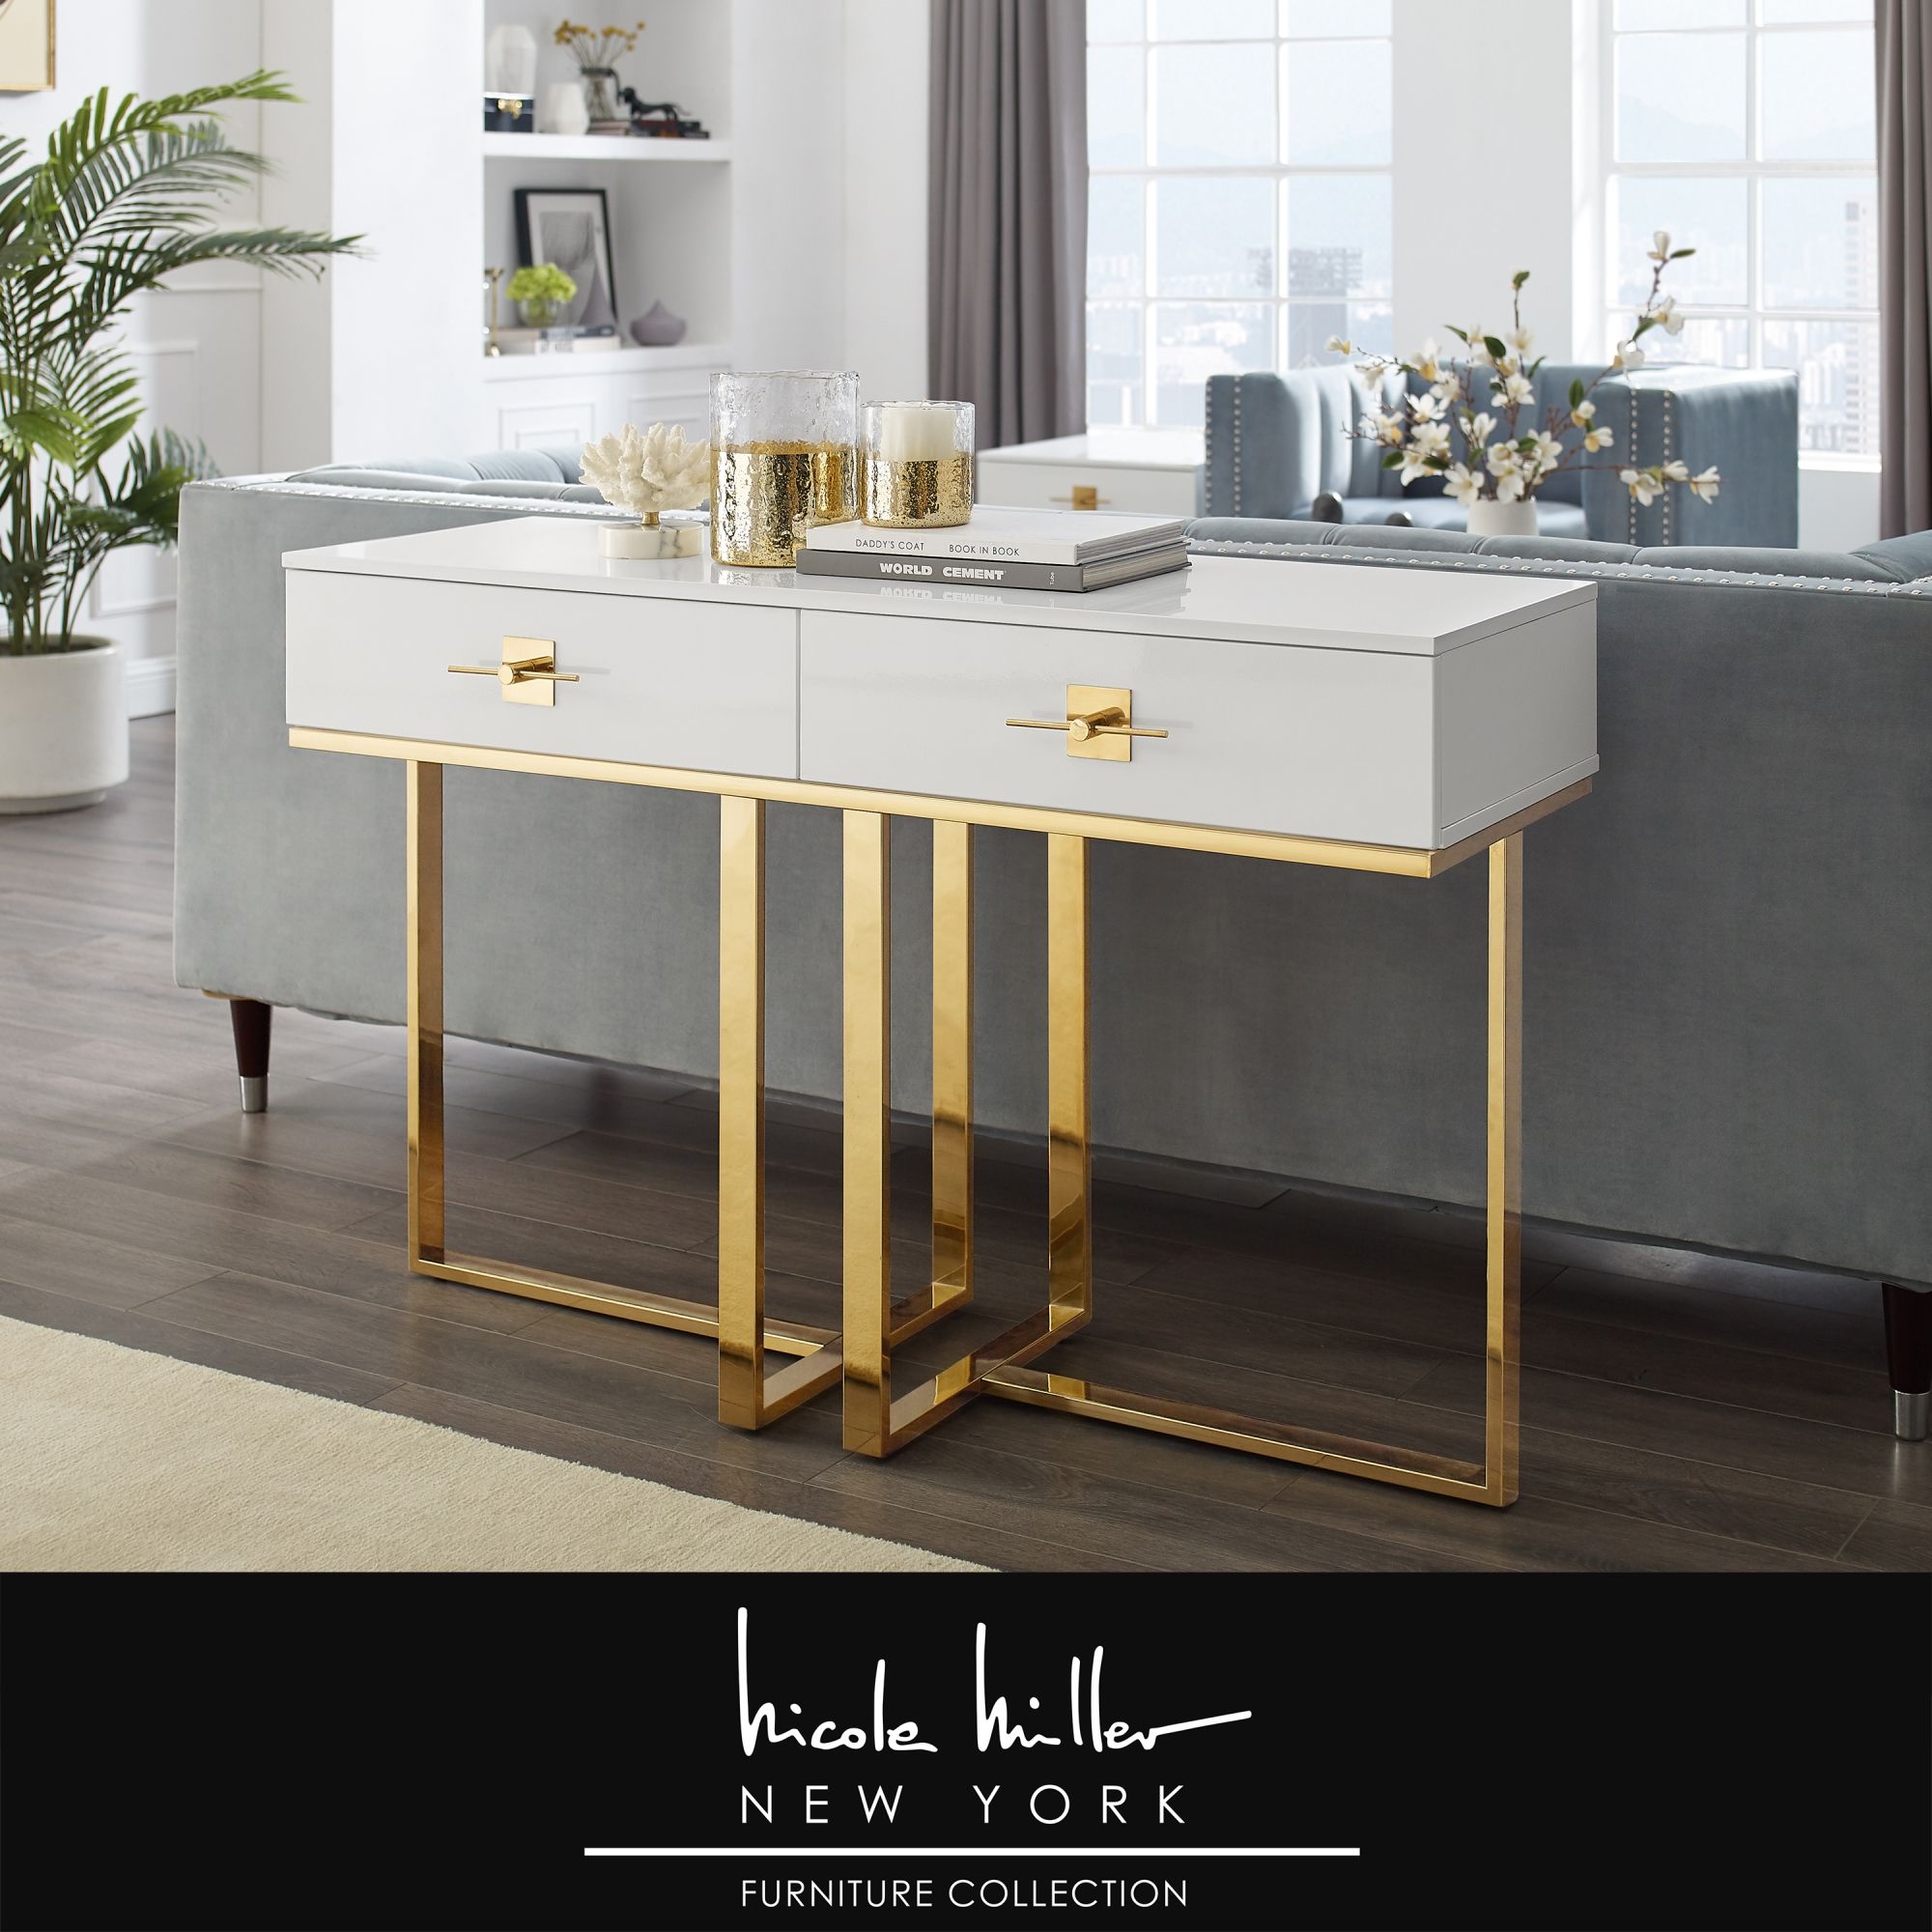 Nicole Miller Meli Console Table 2 Drawers Hight Gloss Intended For Geometric White Console Tables (View 12 of 20)